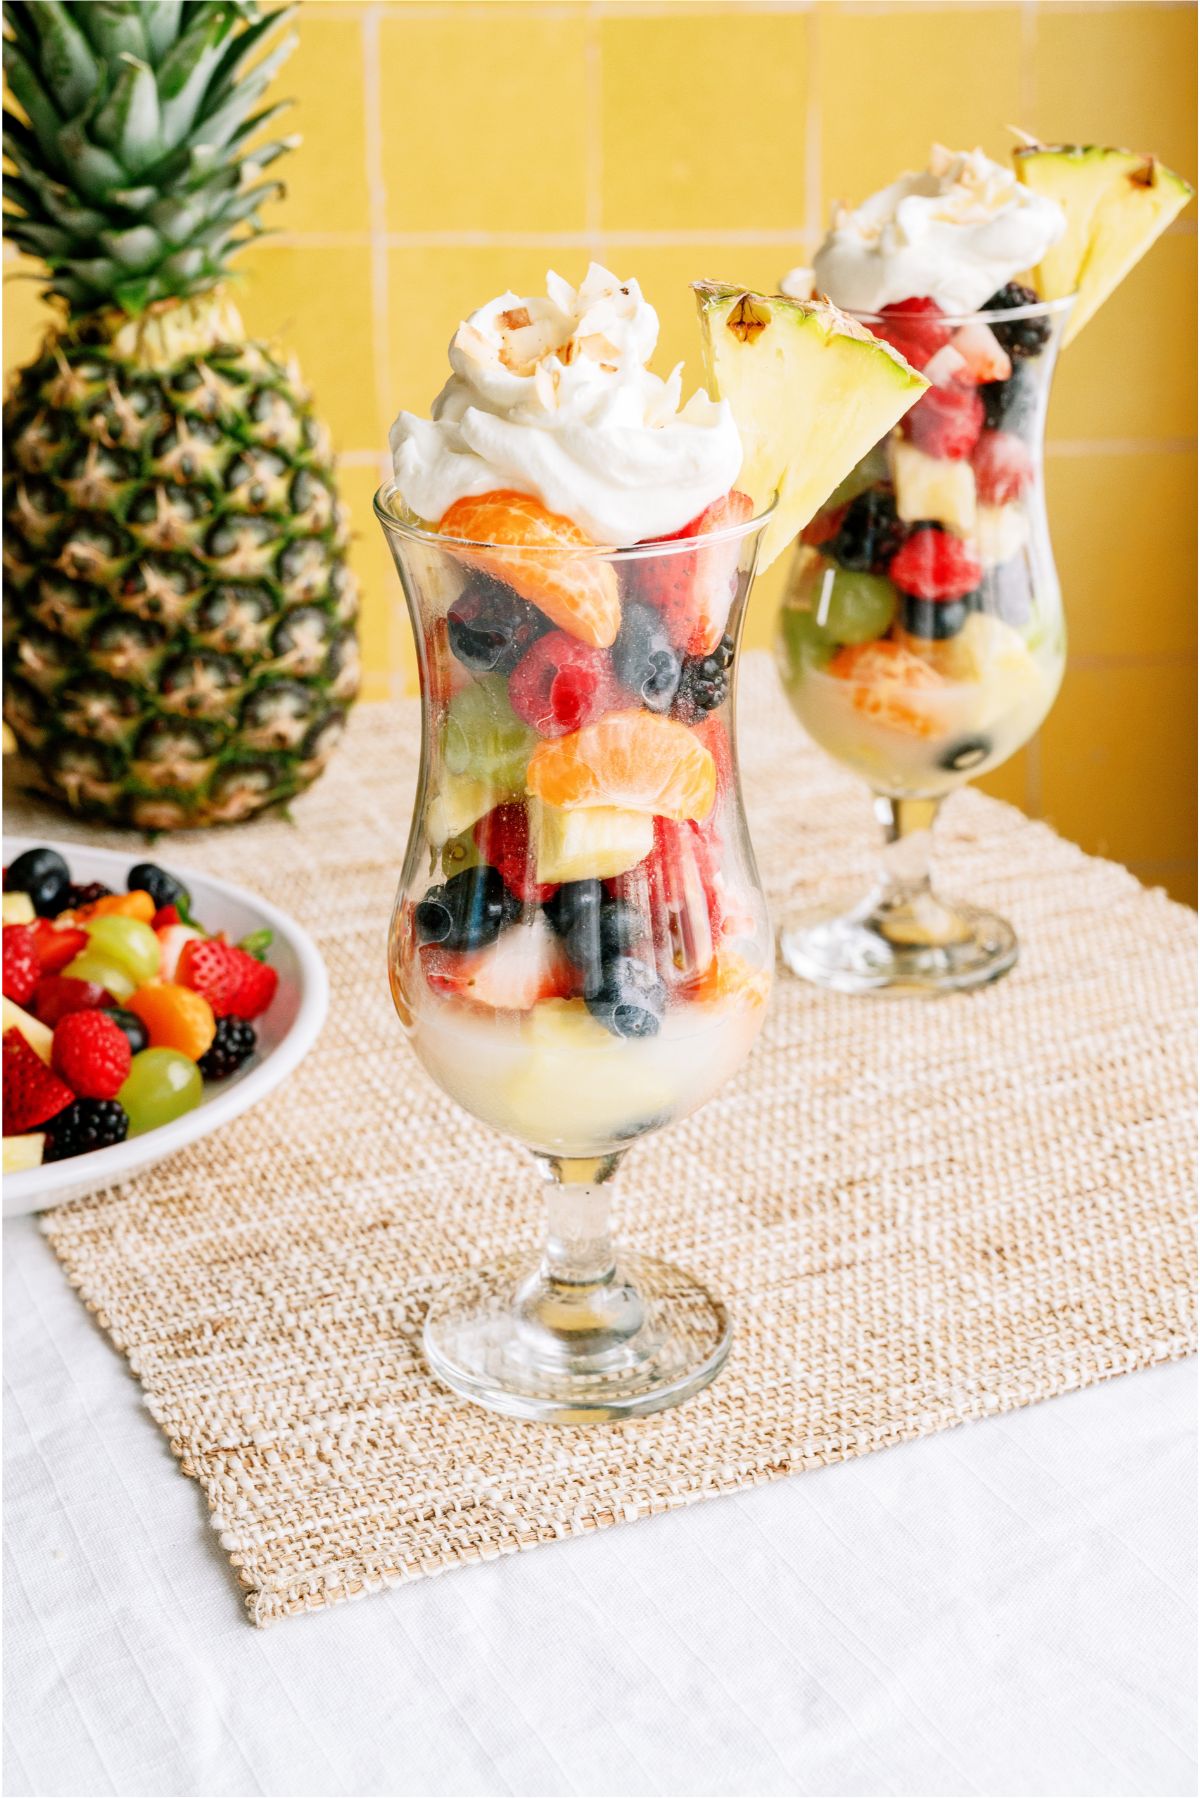 A glass filled with Pina Colada Fruit Salad topped with whip cream and garnished with pineapple